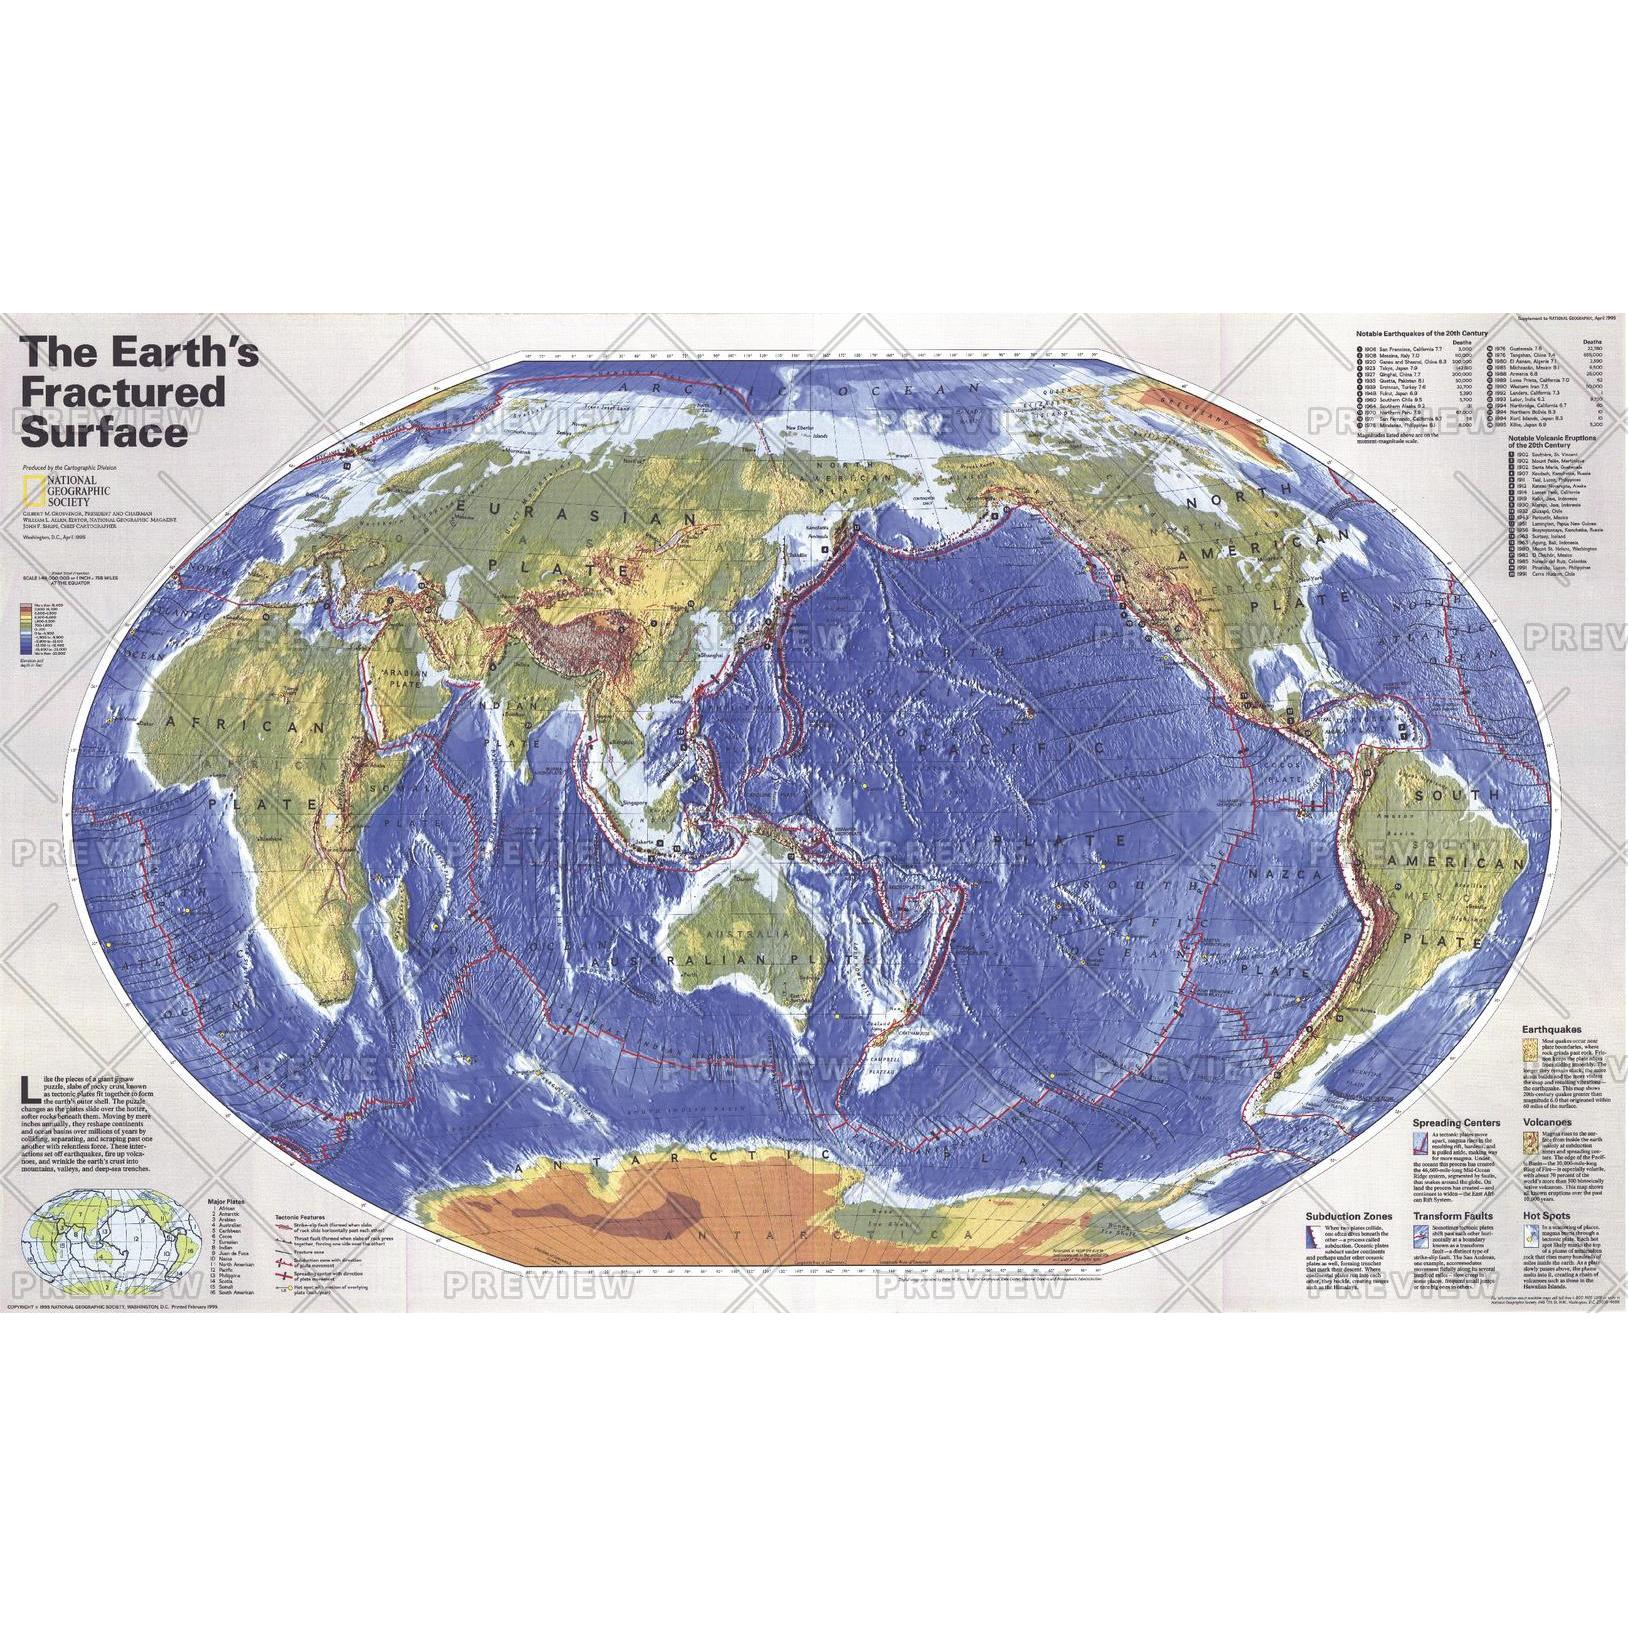 The Earths Fractured Surface - Published 1995 by National Geographic ...